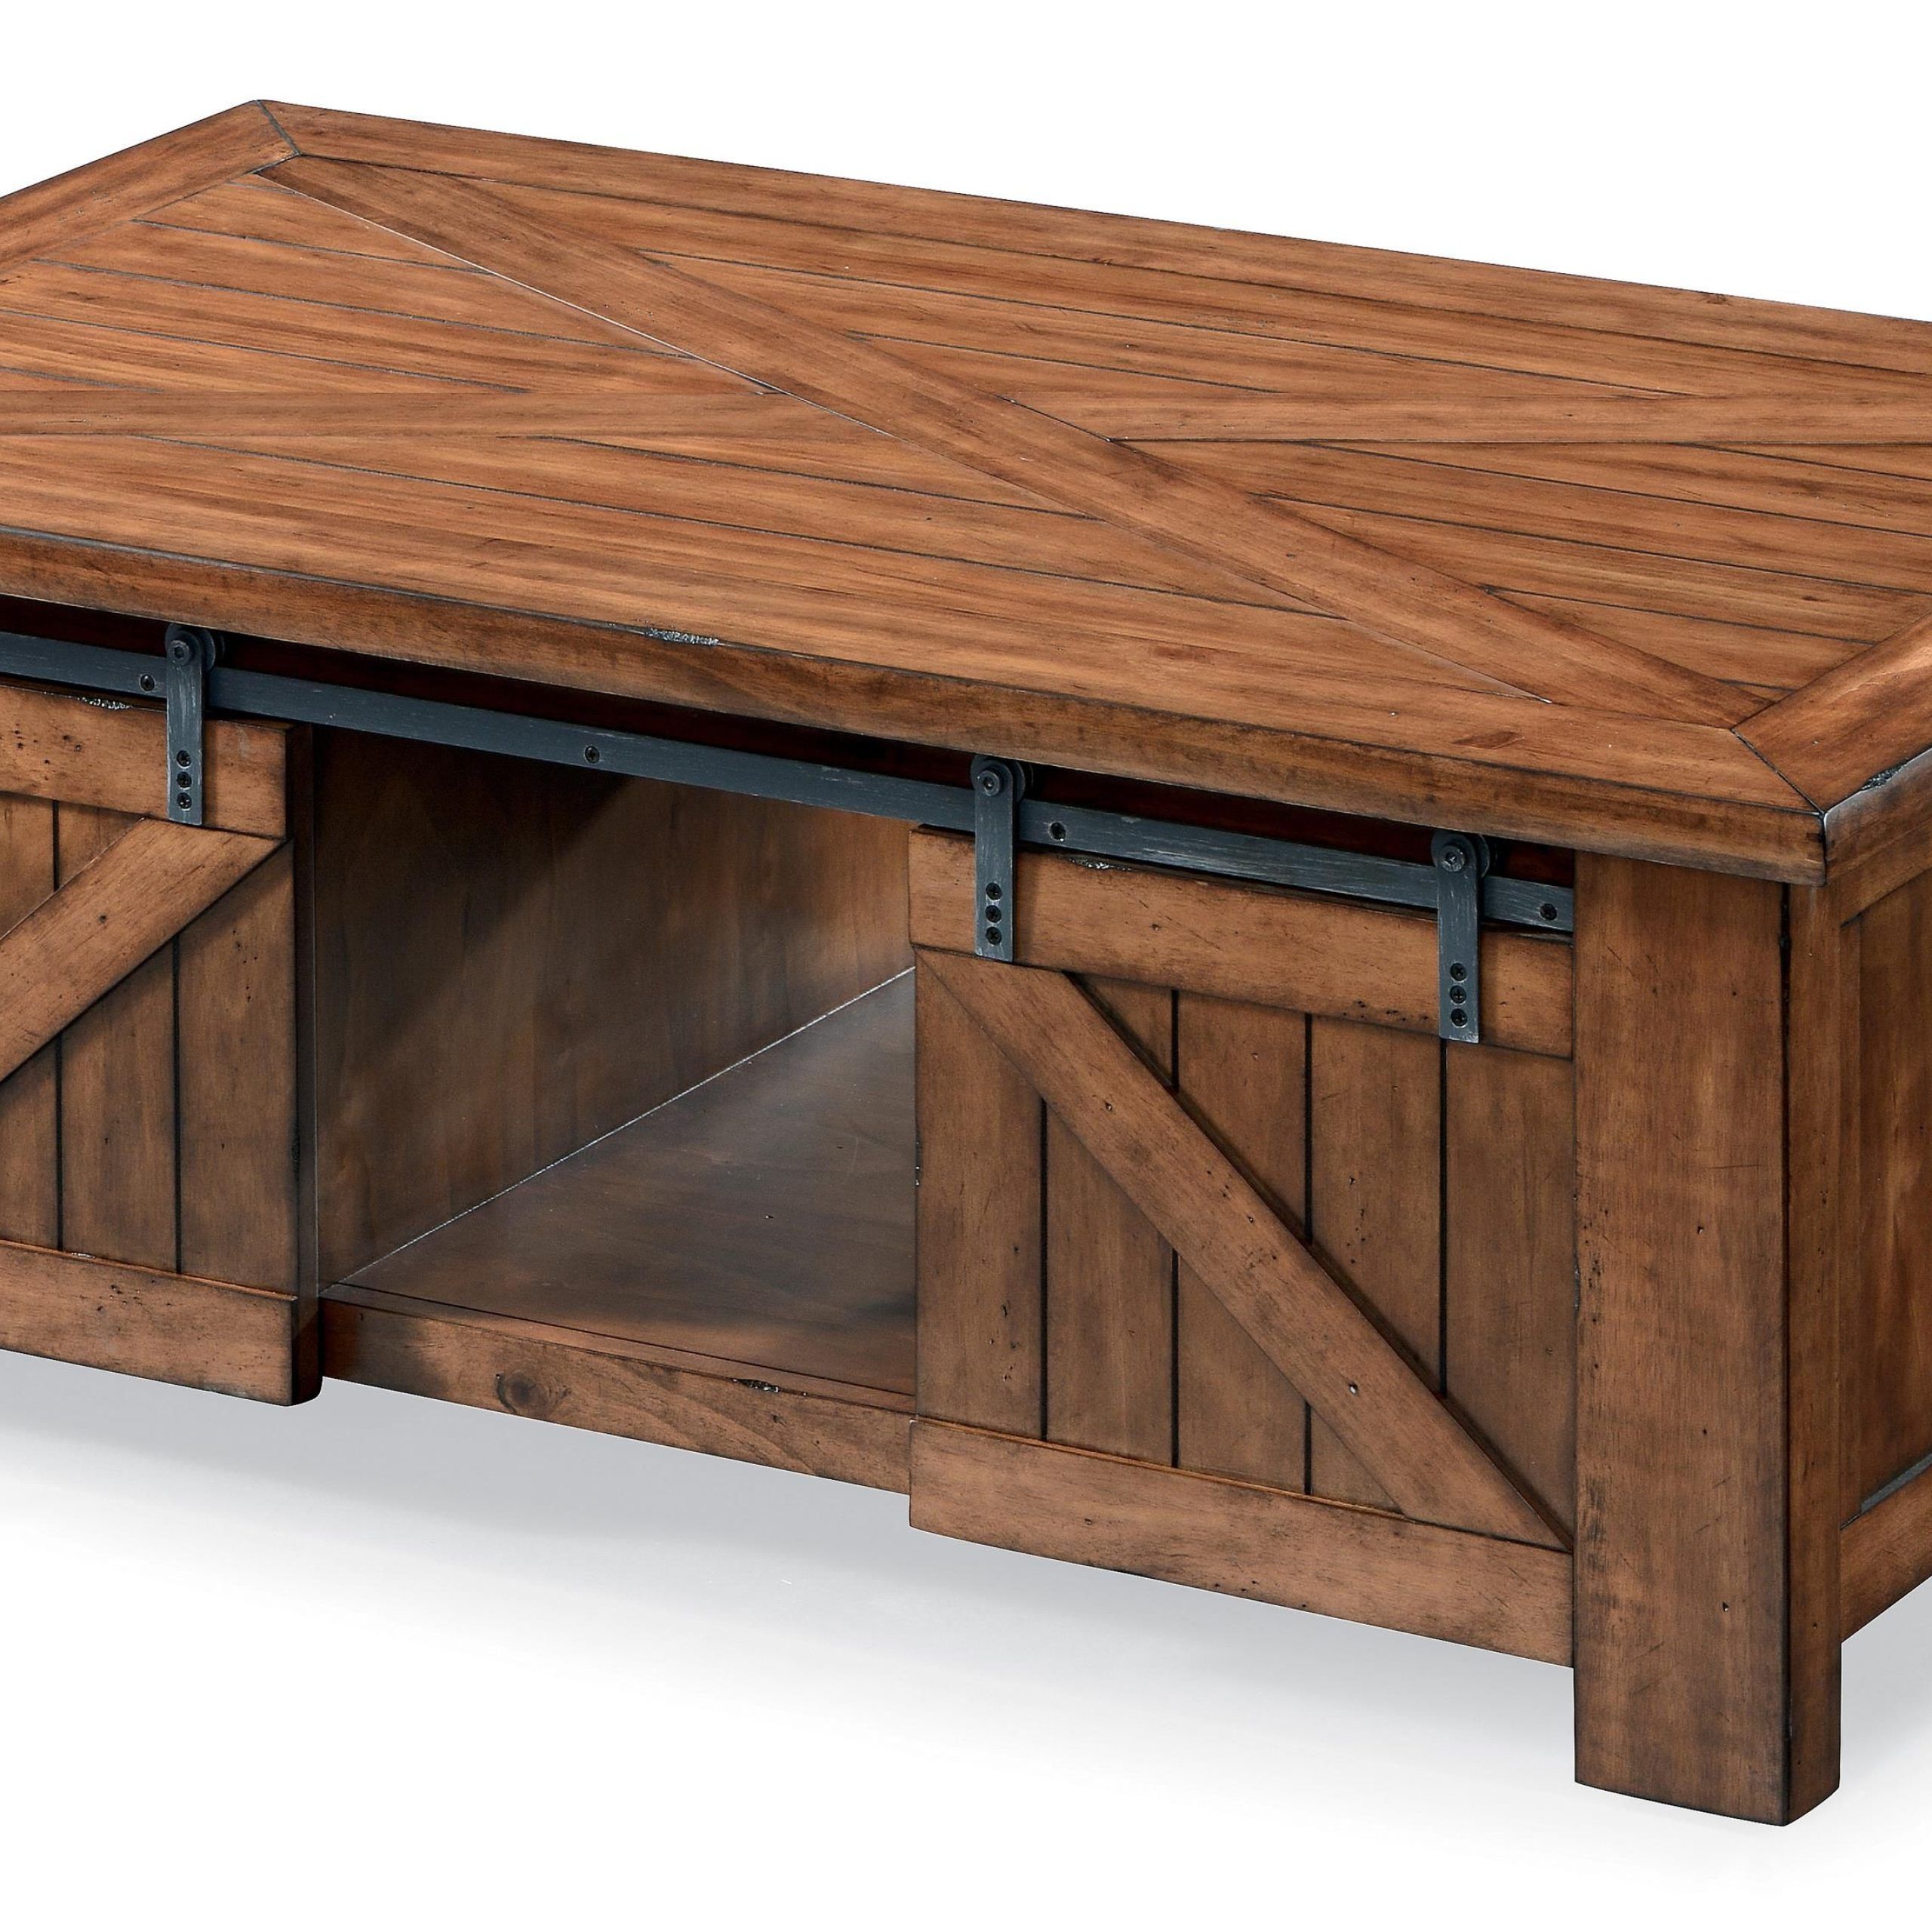 Harper Farm Country Industrial Rectangular Lift Top Cocktail Table With Regarding Well Known Coffee Tables With Storage And Barn Doors (View 5 of 15)